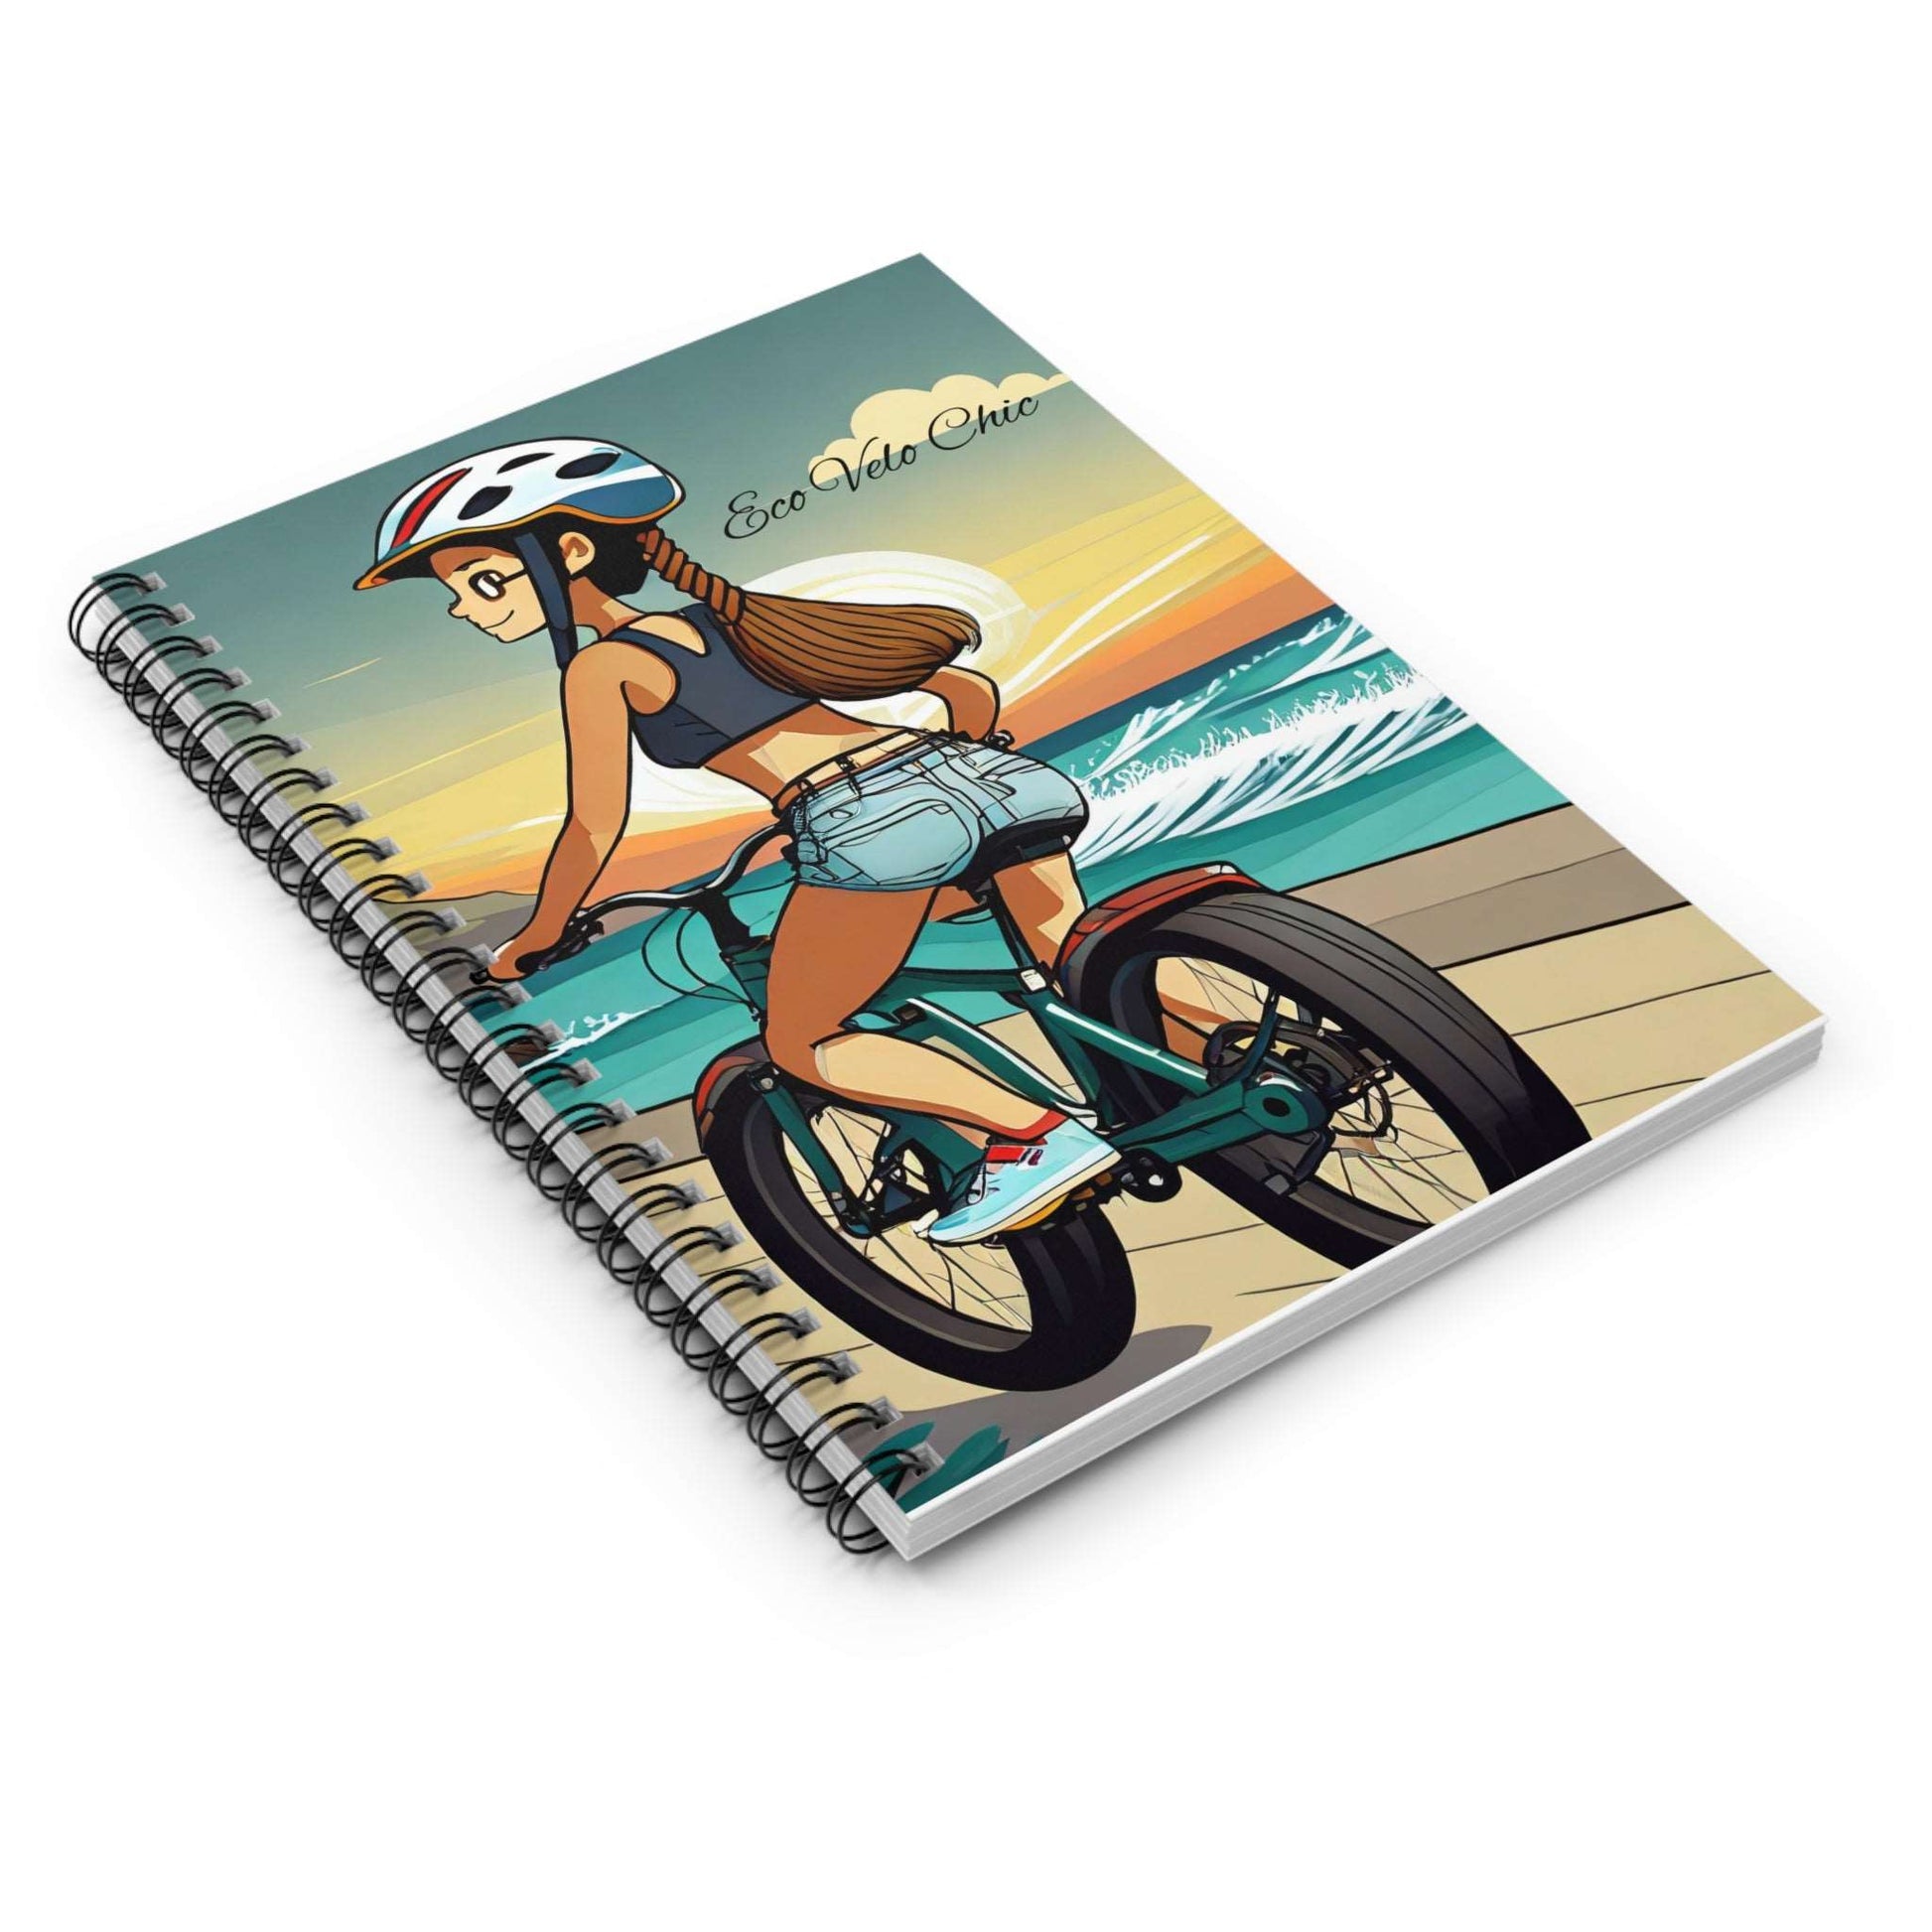 Eco Velo Chic Electric Bicycle Fashion -Spiral Notebook - Ruled Line